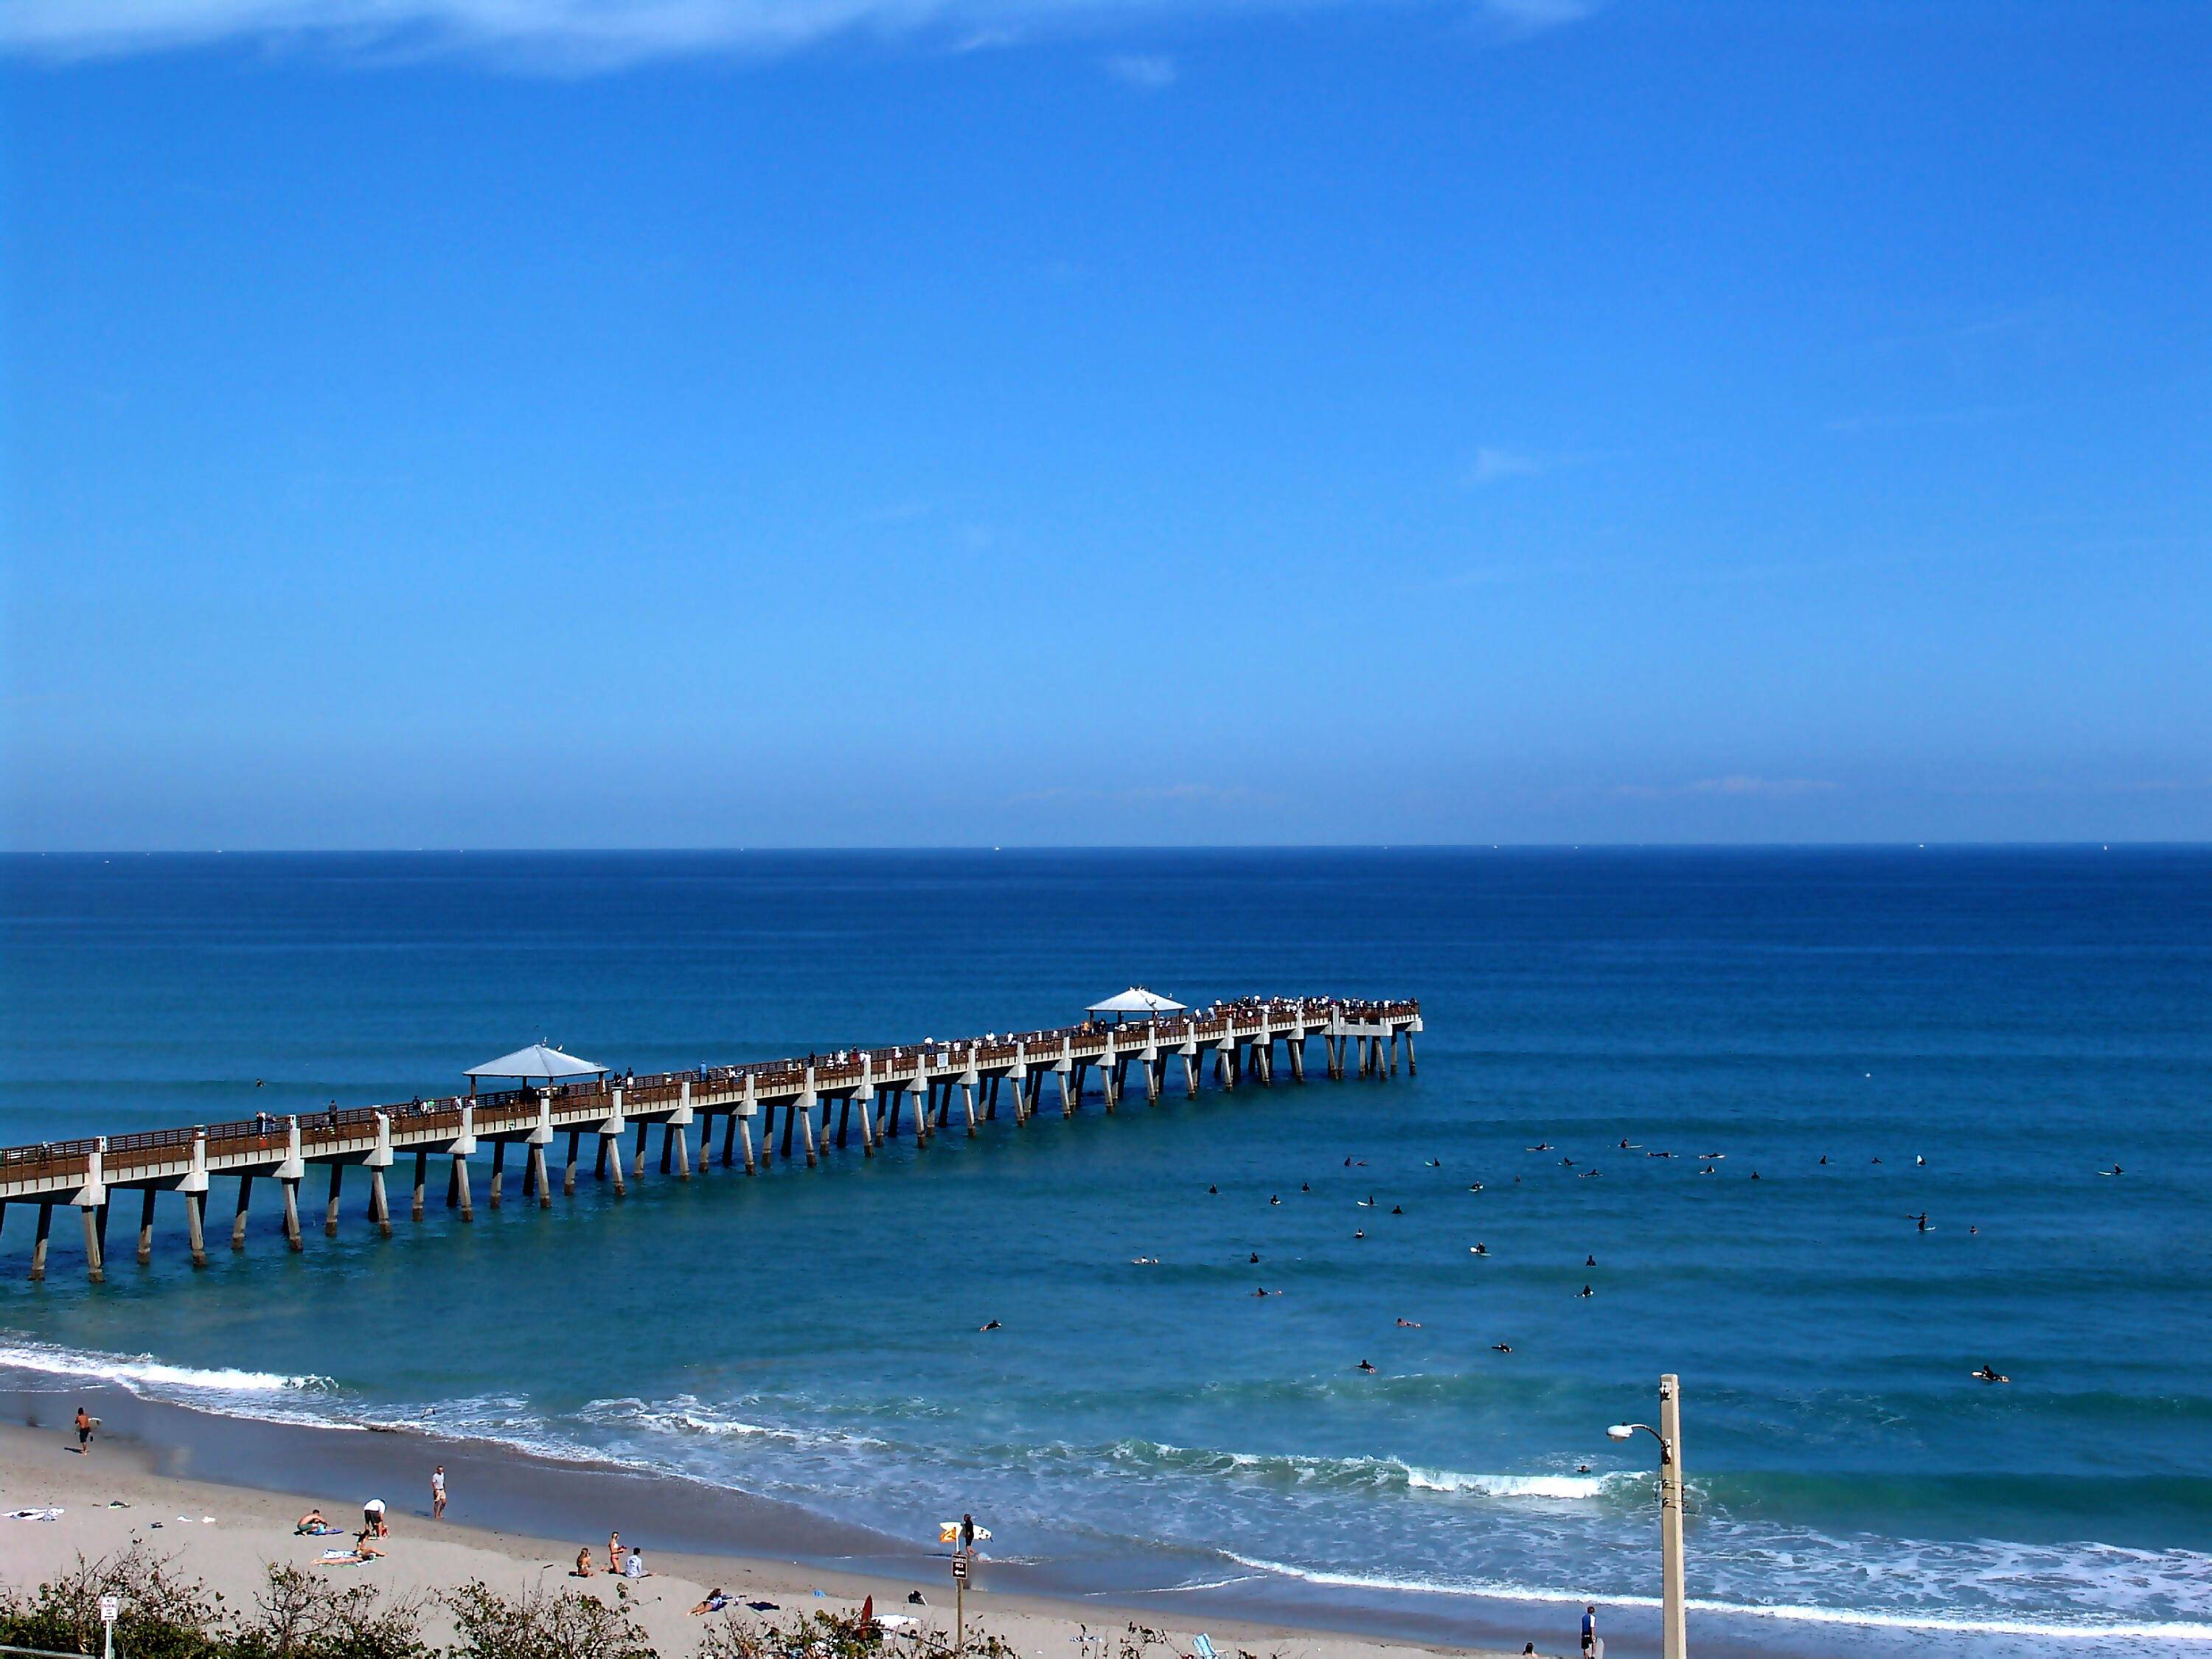 AVAILABLE NOW TOMOVE INTO THIS Beautiful unit overlooking Juno Beach Pier.